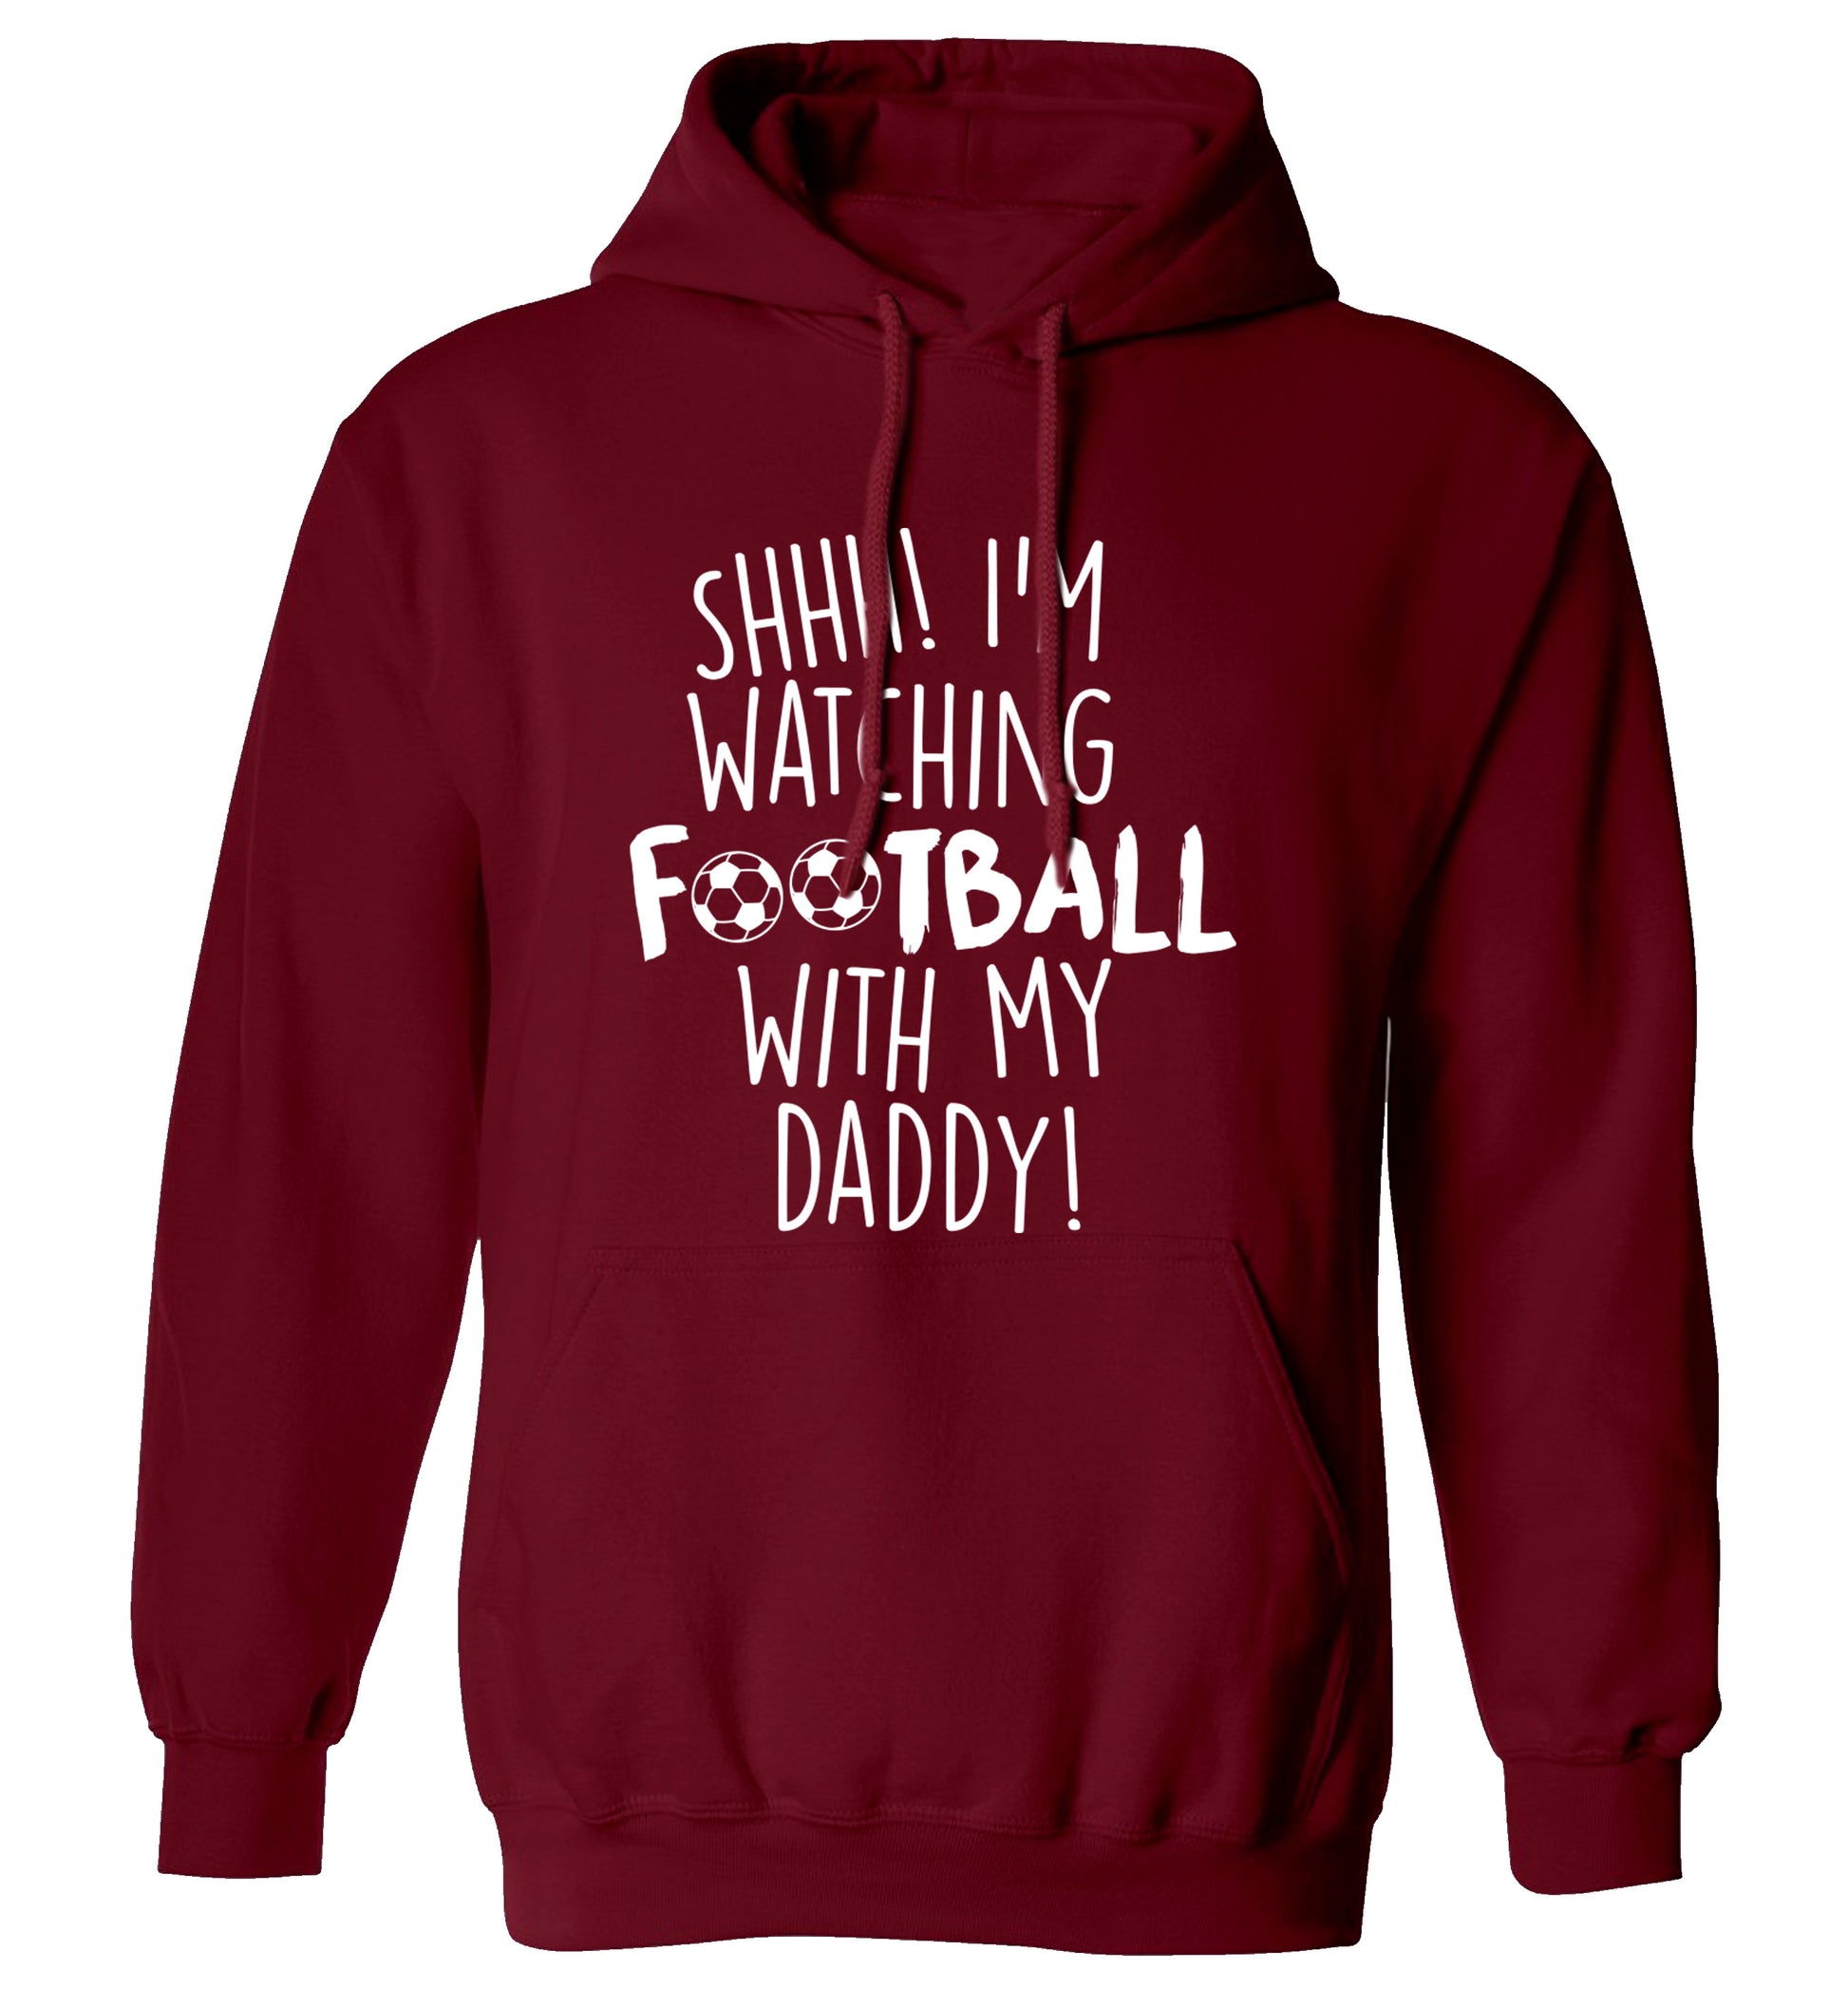 Shhh I'm watching football with my daddy adults unisexmaroon hoodie 2XL